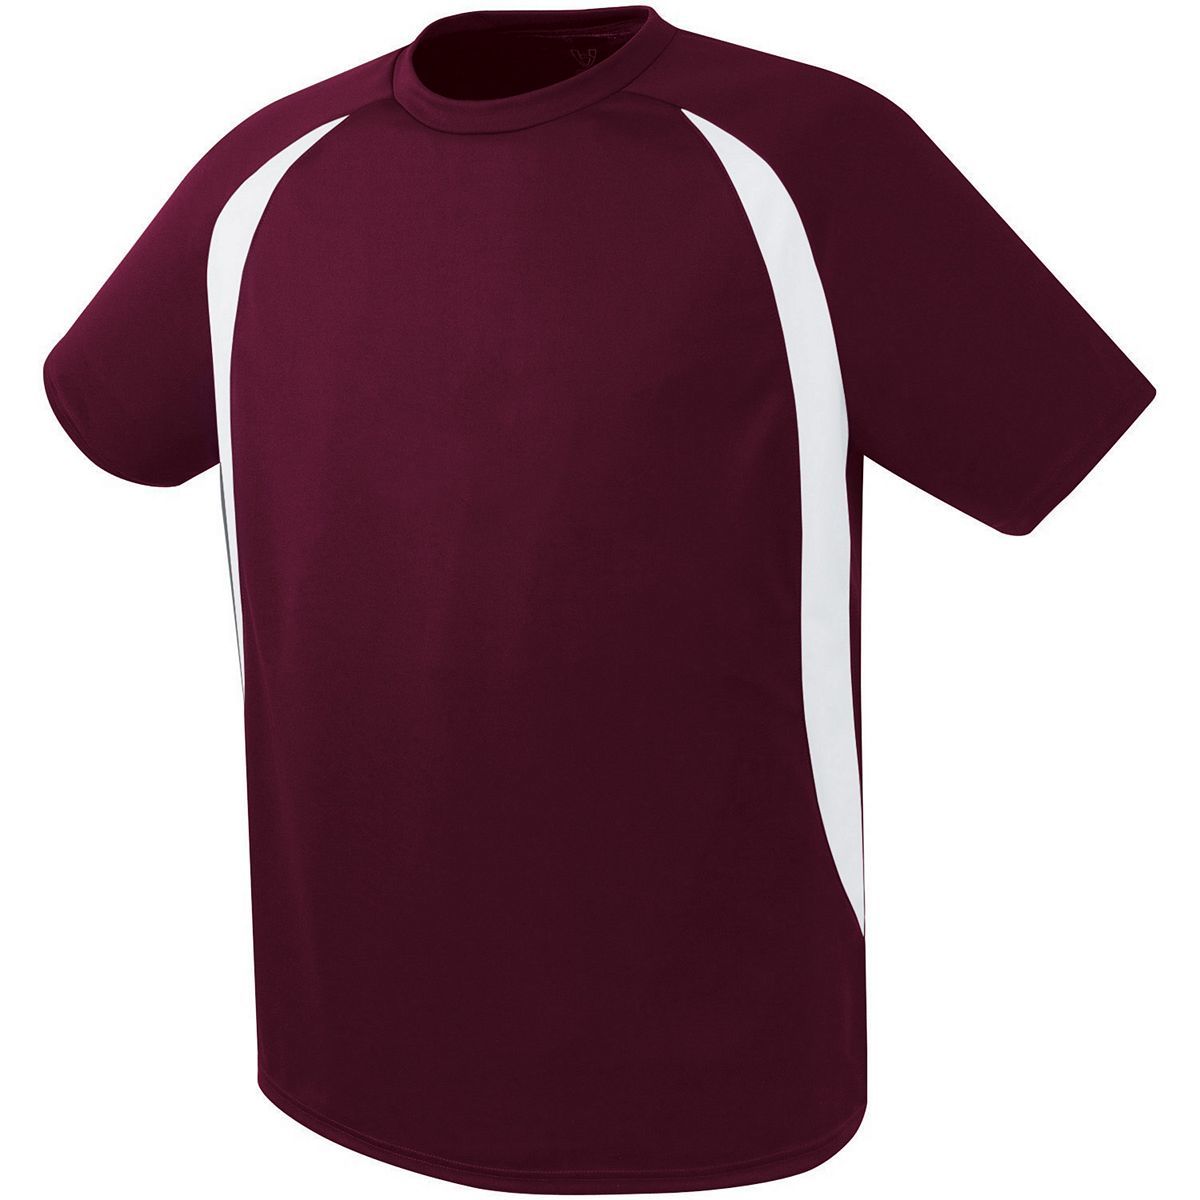 High 5 Liberty  Soccer Jersey in Maroon/White  -Part of the Adult, Adult-Jersey, High5-Products, Soccer, Shirts, All-Sports-1 product lines at KanaleyCreations.com